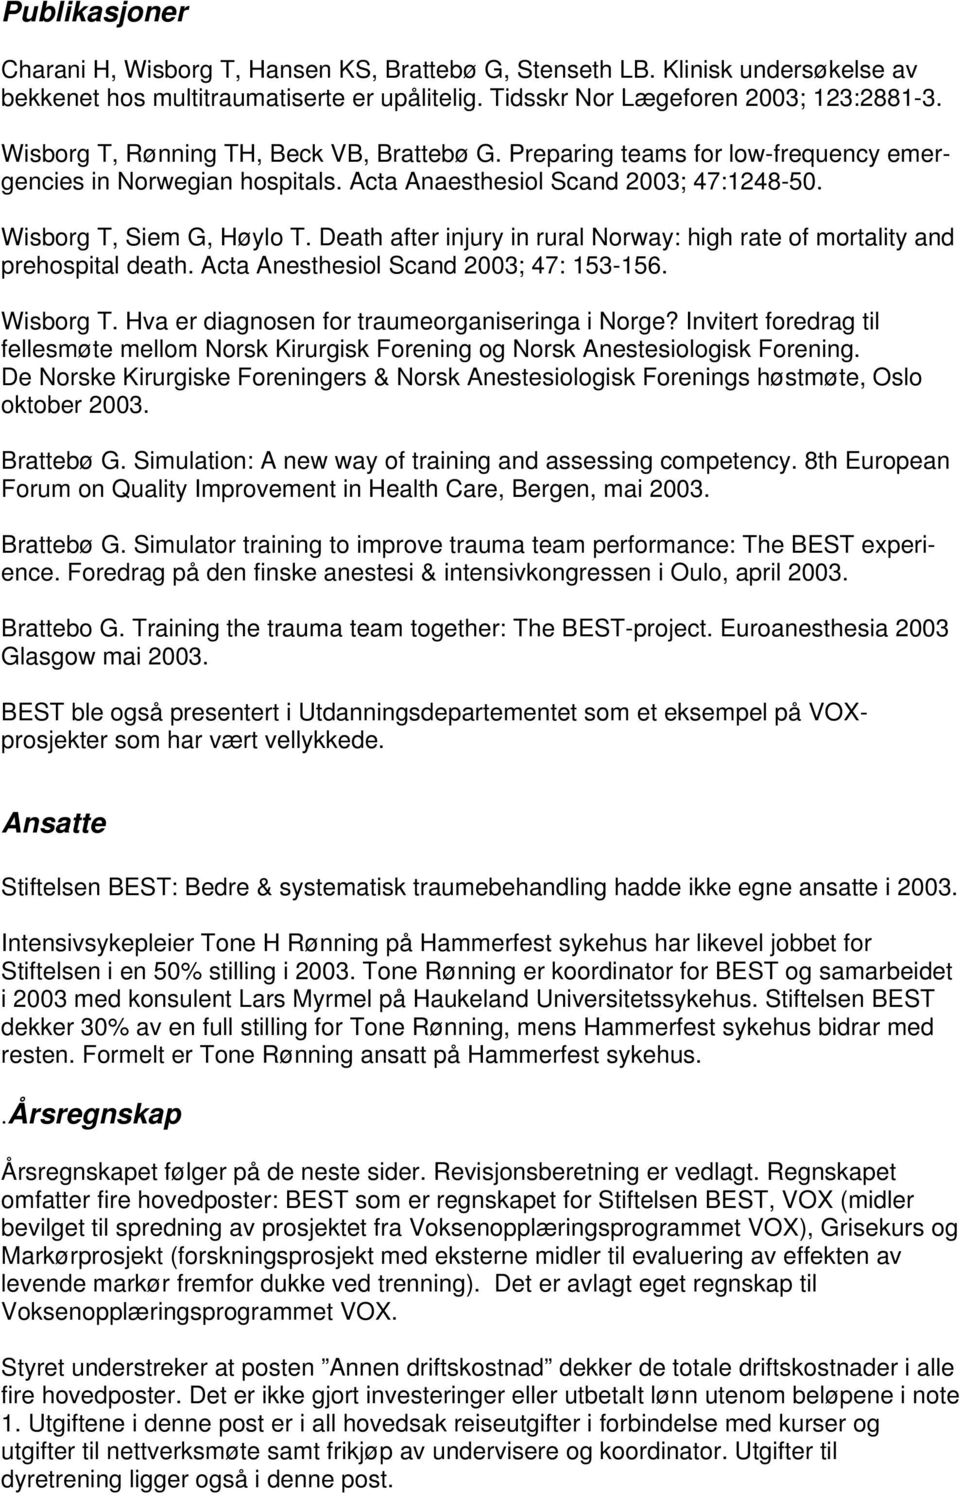 Death after injury in rural Norway: high rate of mortality and prehospital death. Acta Anesthesiol Scand 2003; 47: 153-156. Wisborg T. Hva er diagnosen for traumeorganiseringa i Norge?